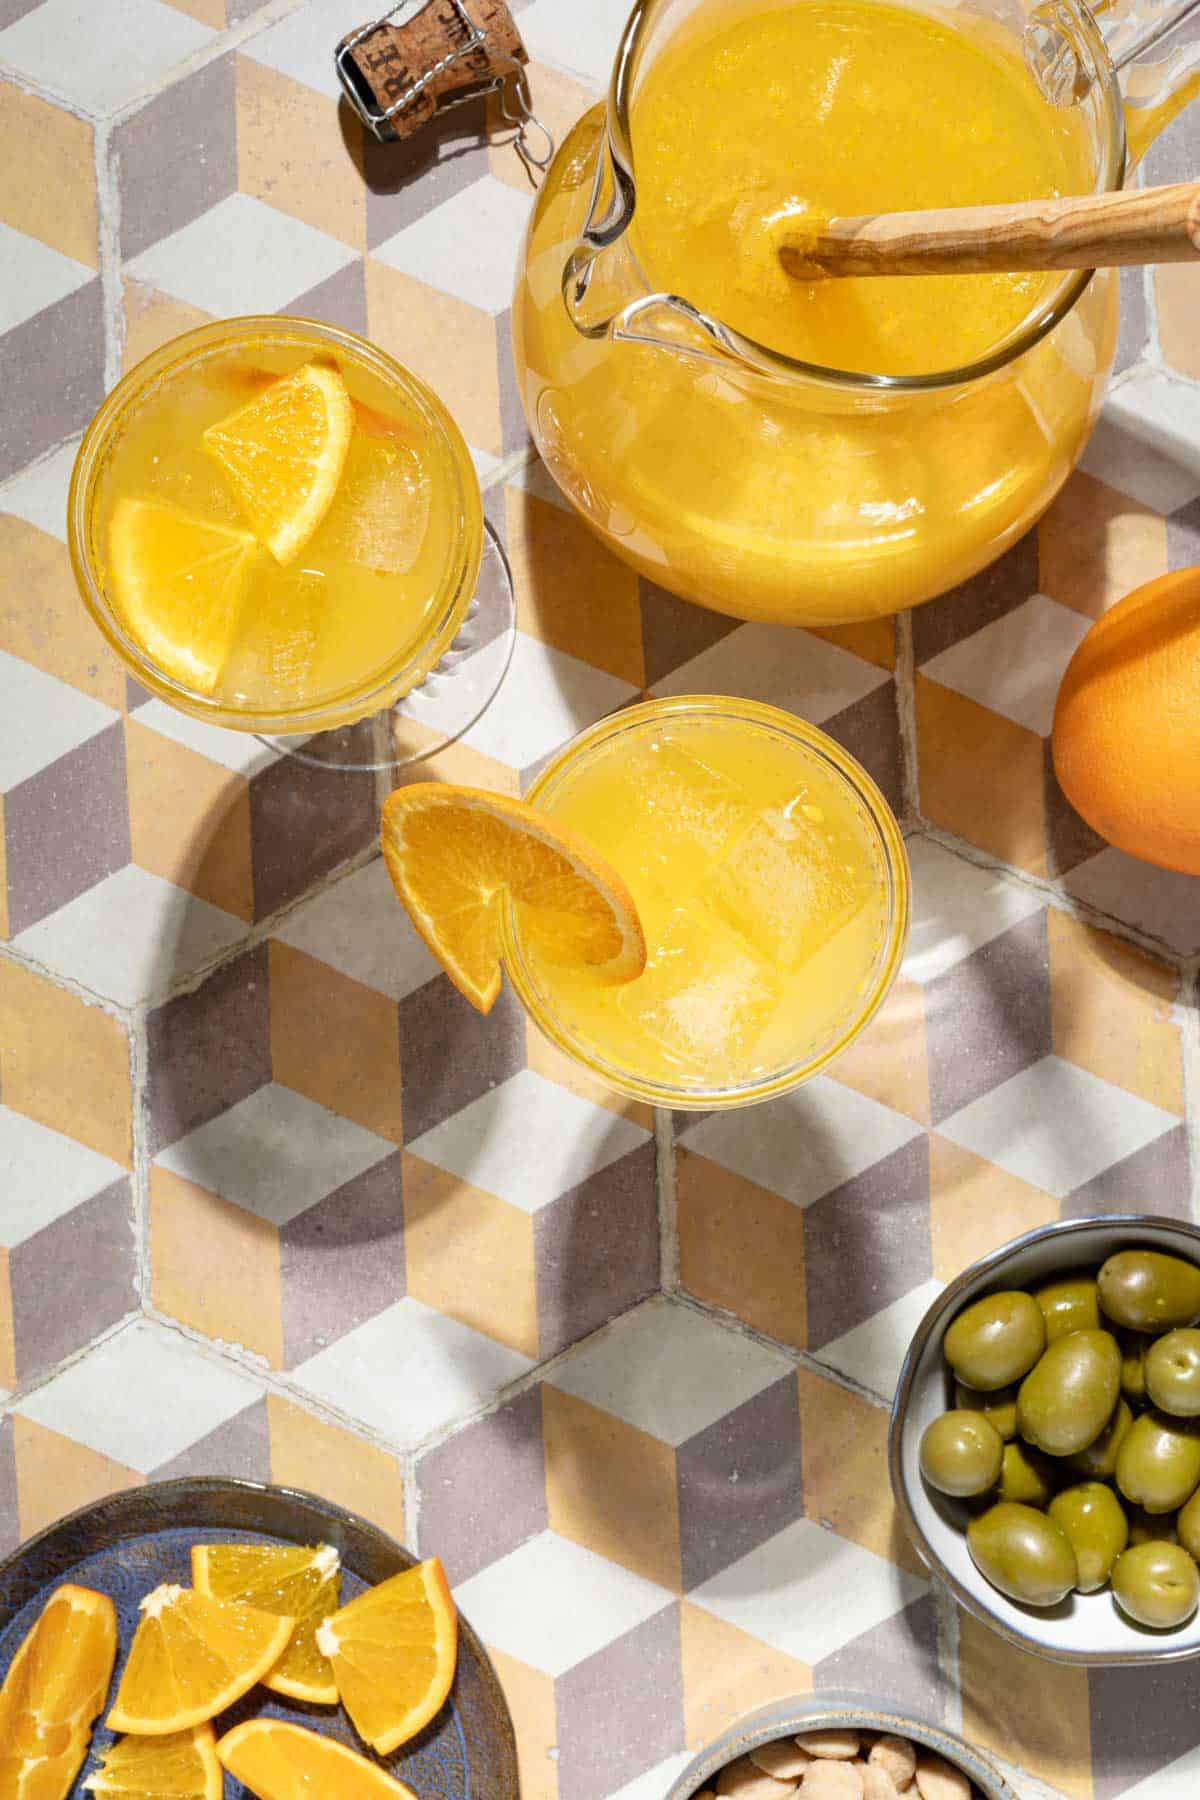 overhead shot of a pitcher of agua de valencia, two glasses of agua de valencia, an orange, a bowl of almonds, a plate of orange slices and a bowl of green olives.